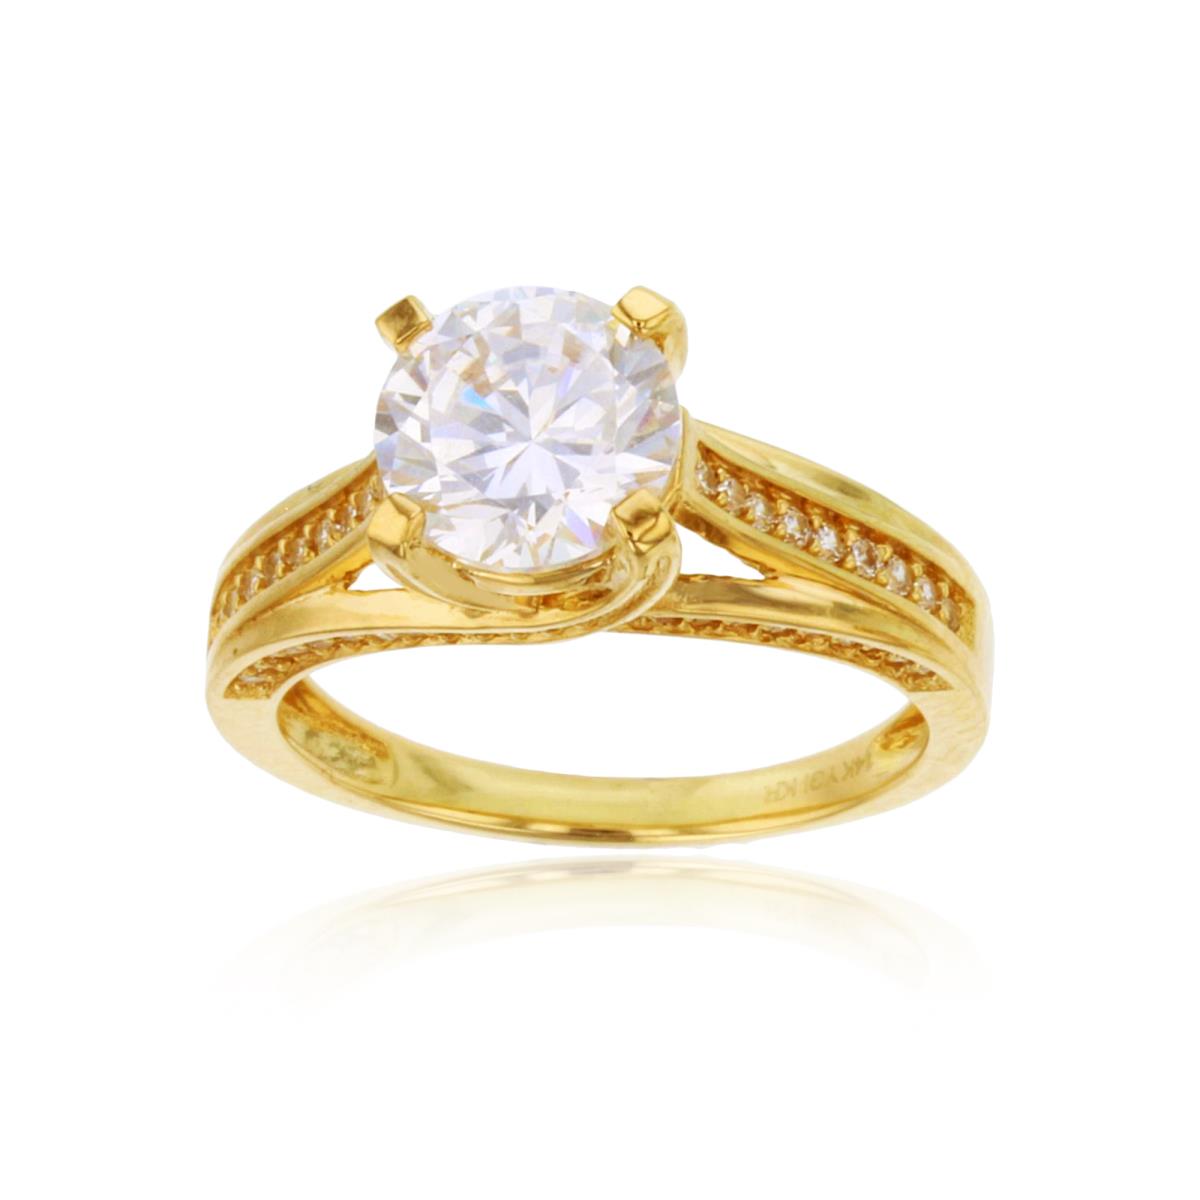 10K Yellow Gold 8mm Round Cut CZ Twisted Shank Engagement Ring